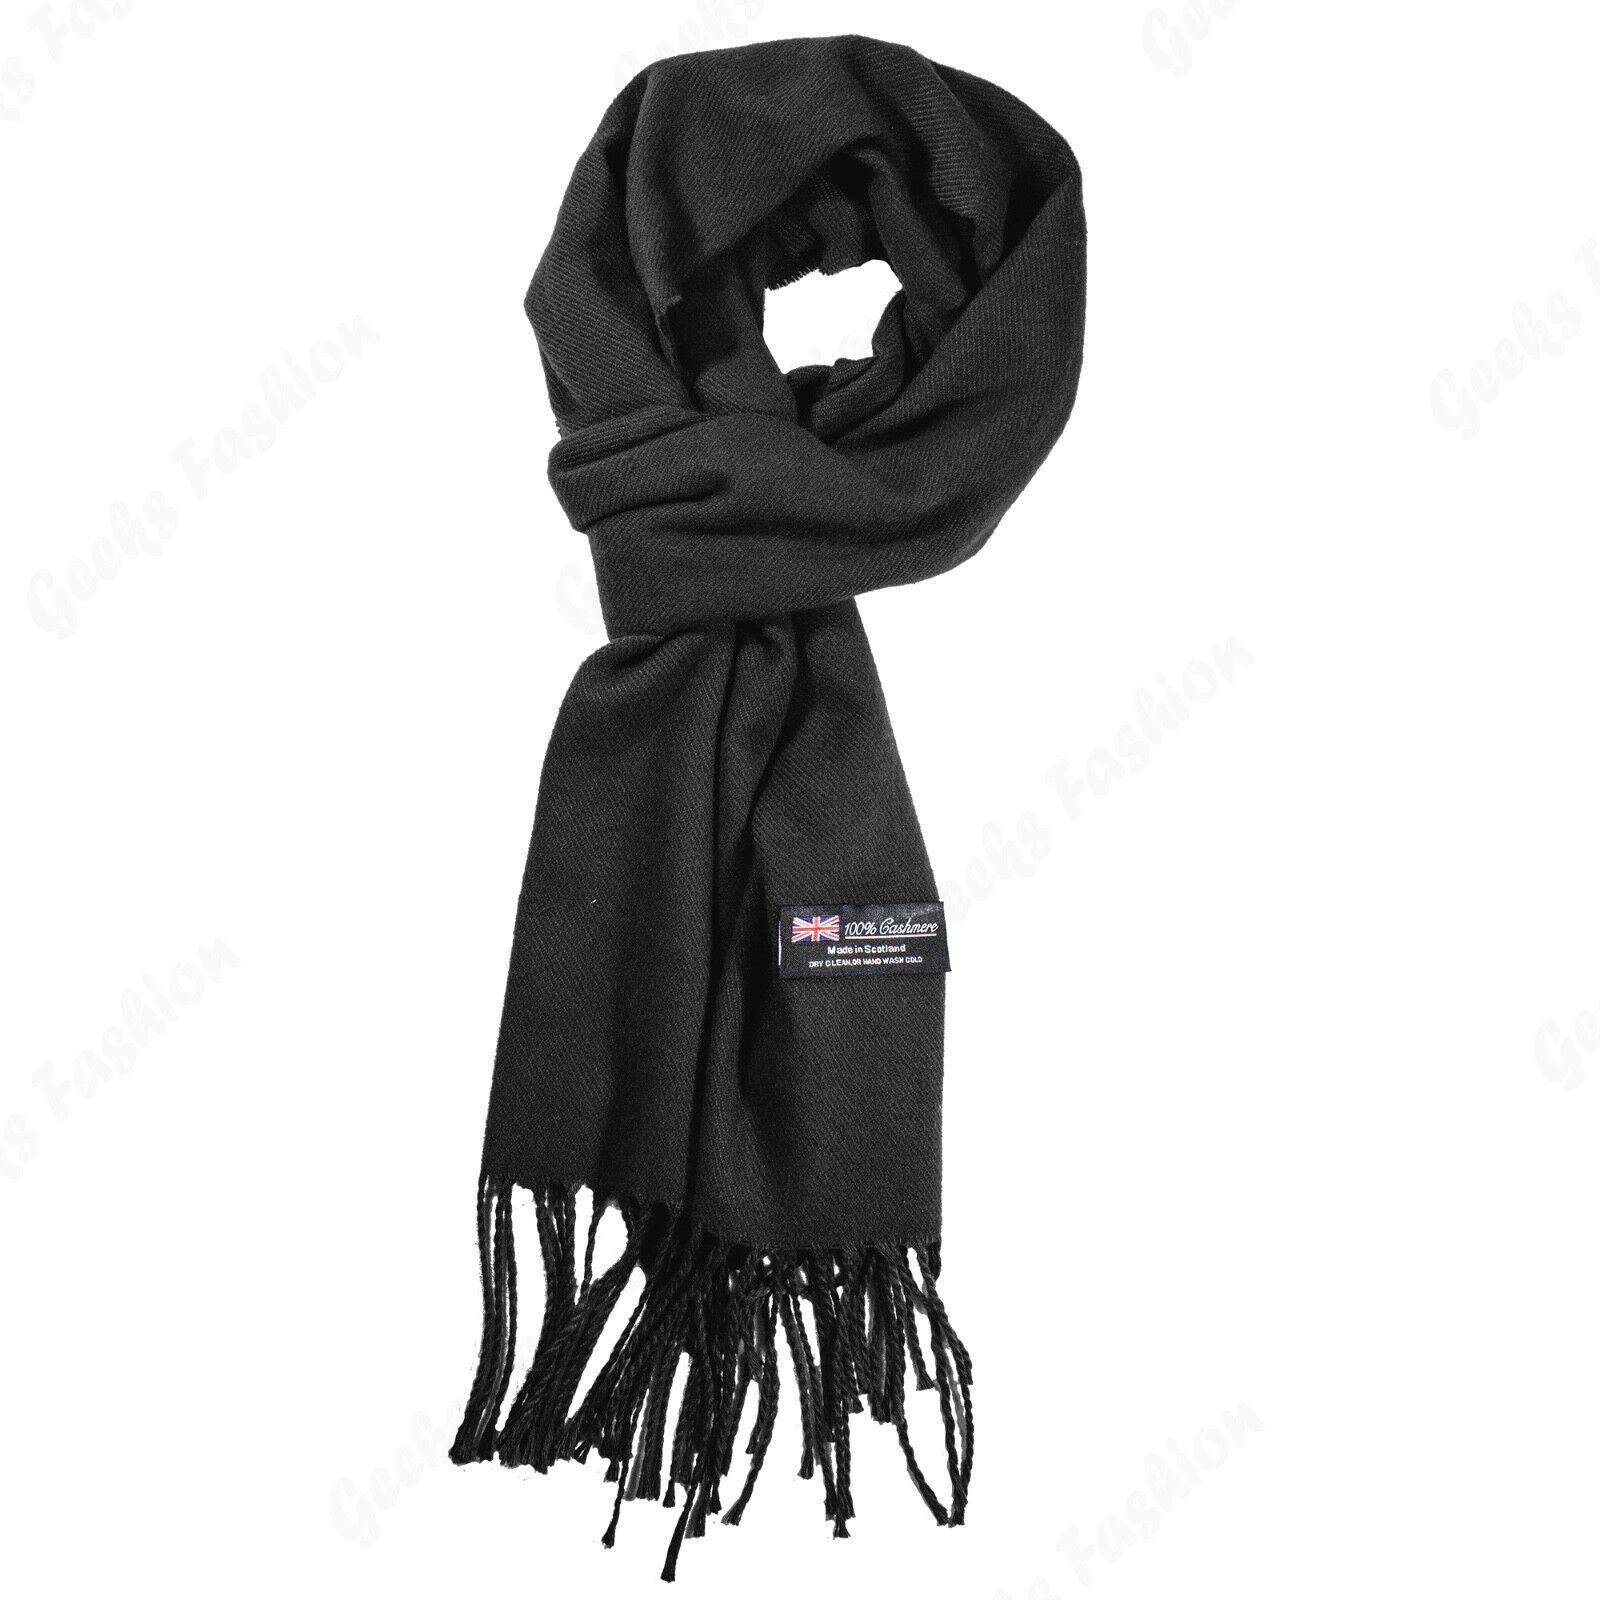 New SOLID 100%CASHMERE winter SCARF High Quality MADE IN SCOTLAND SOFT unisex